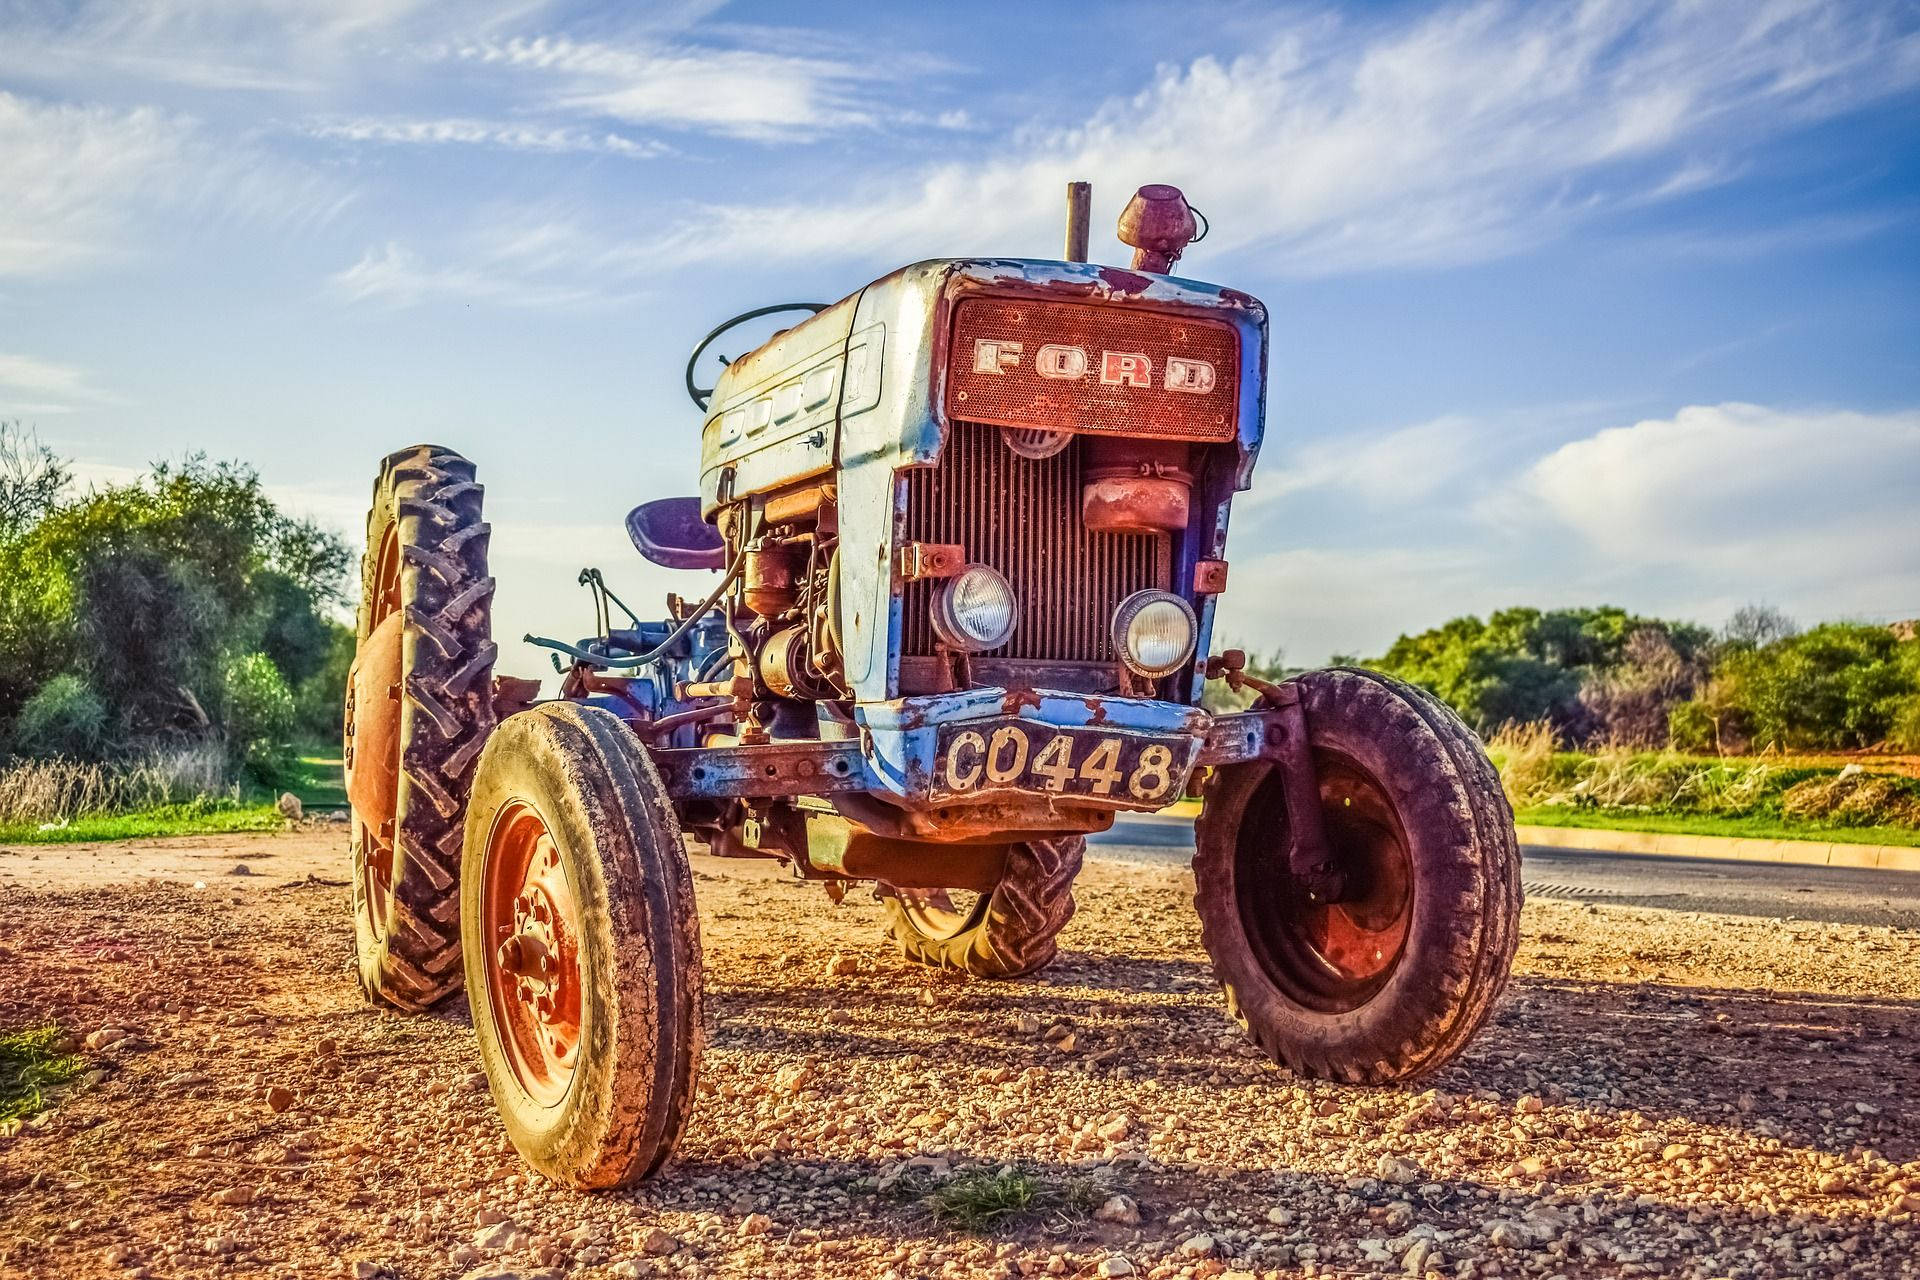 Caption: Classic Ford Tractor in the Field Wallpaper